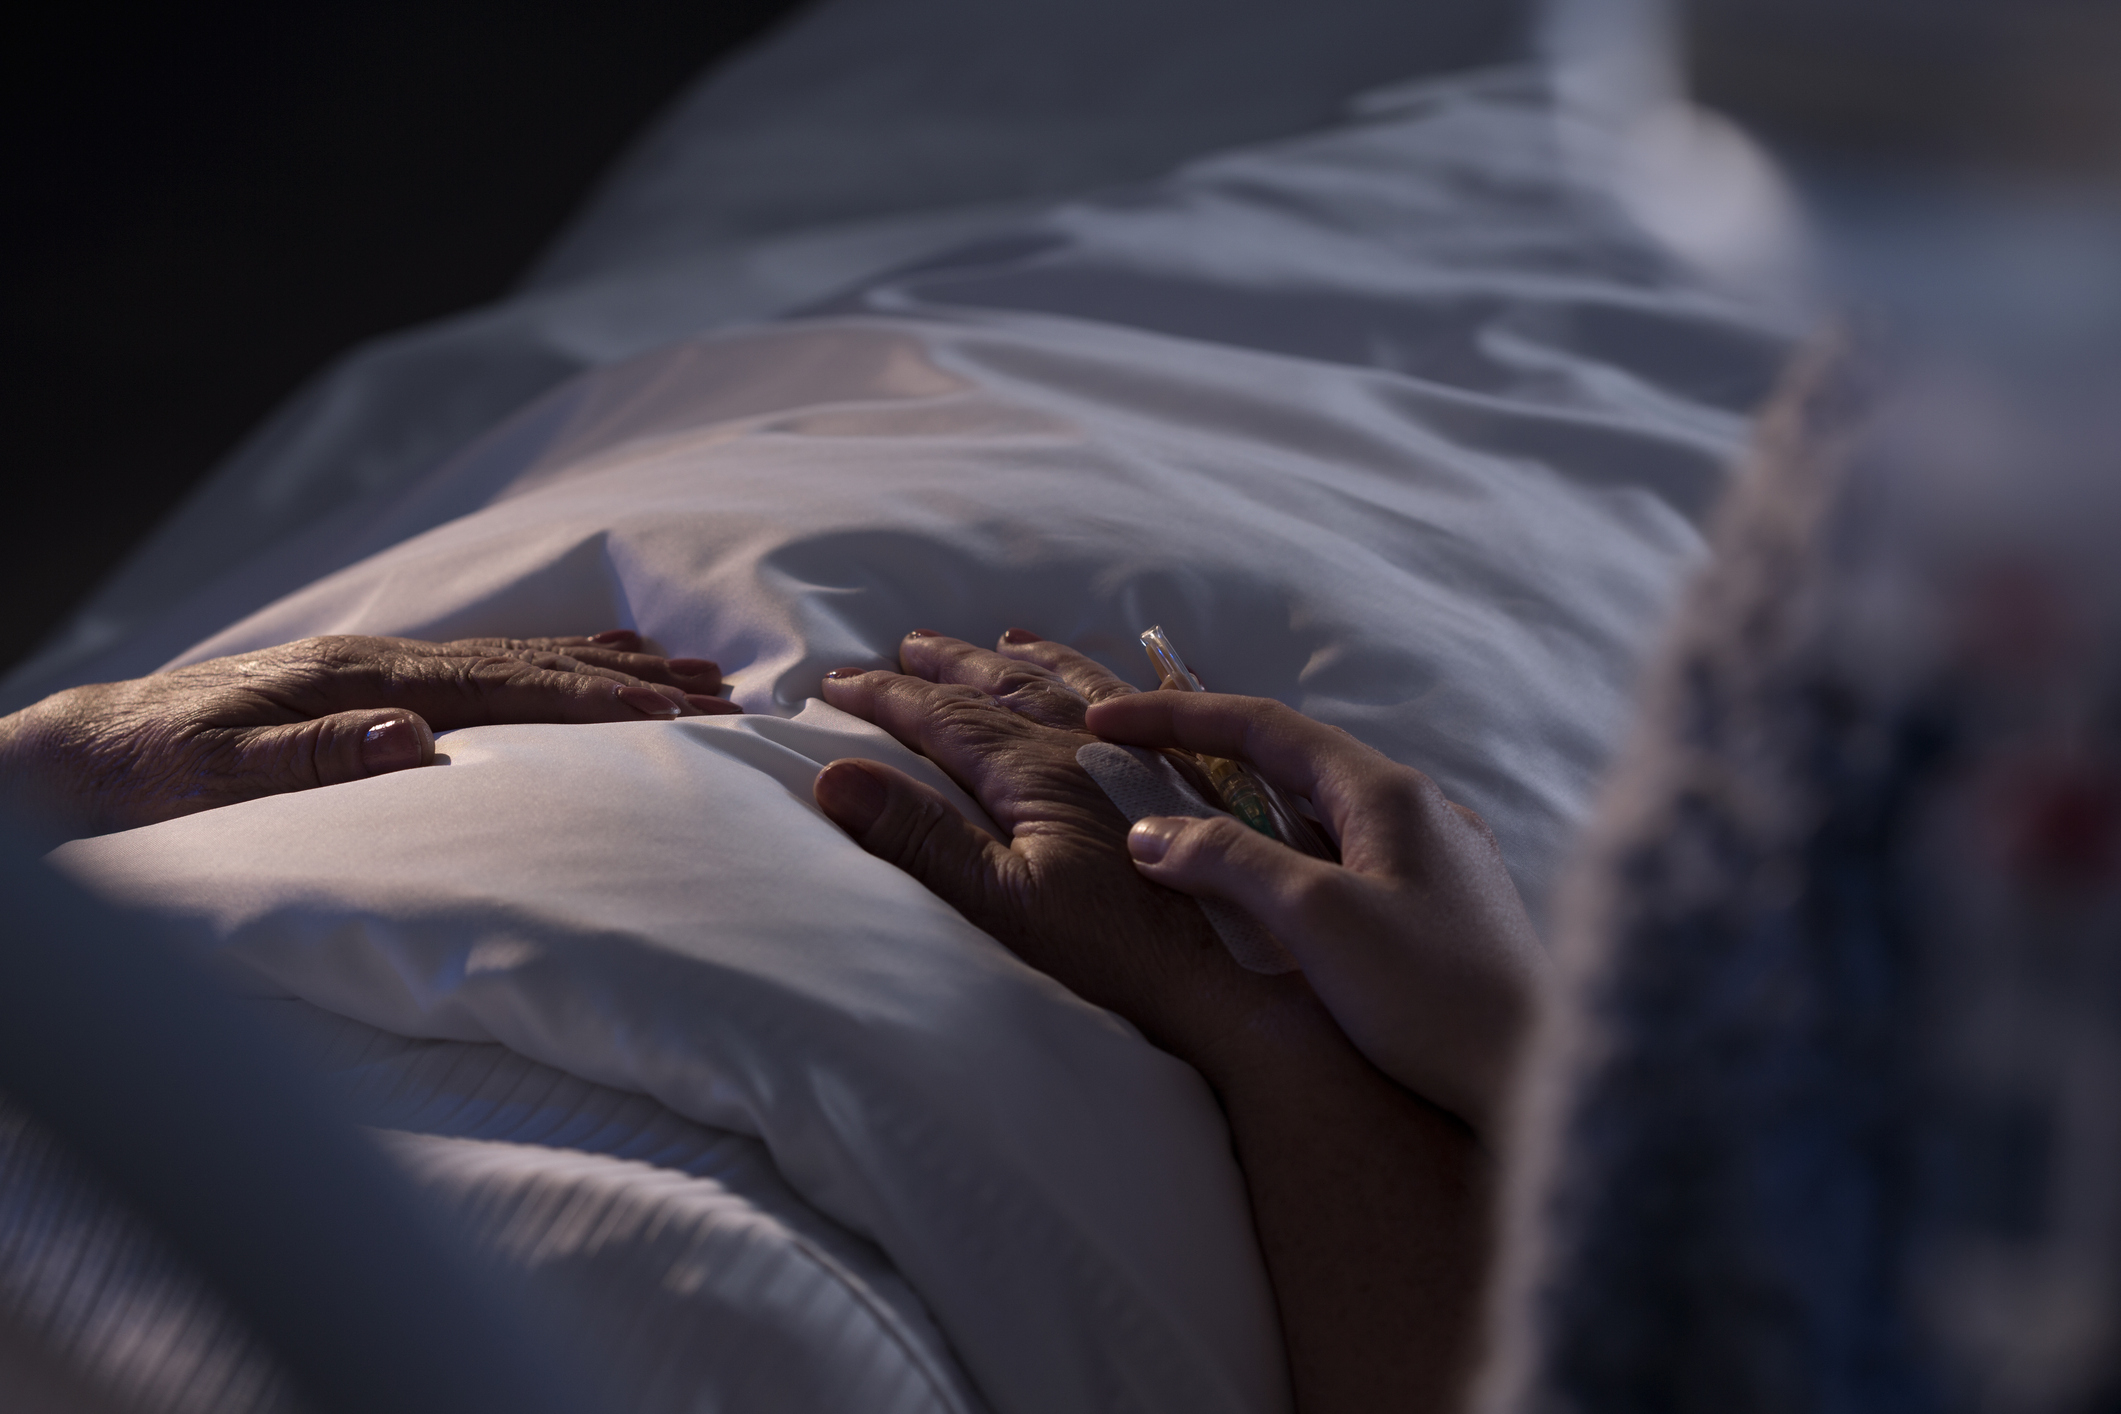 Person resting in bed with another&#x27;s hand holding theirs in comfort